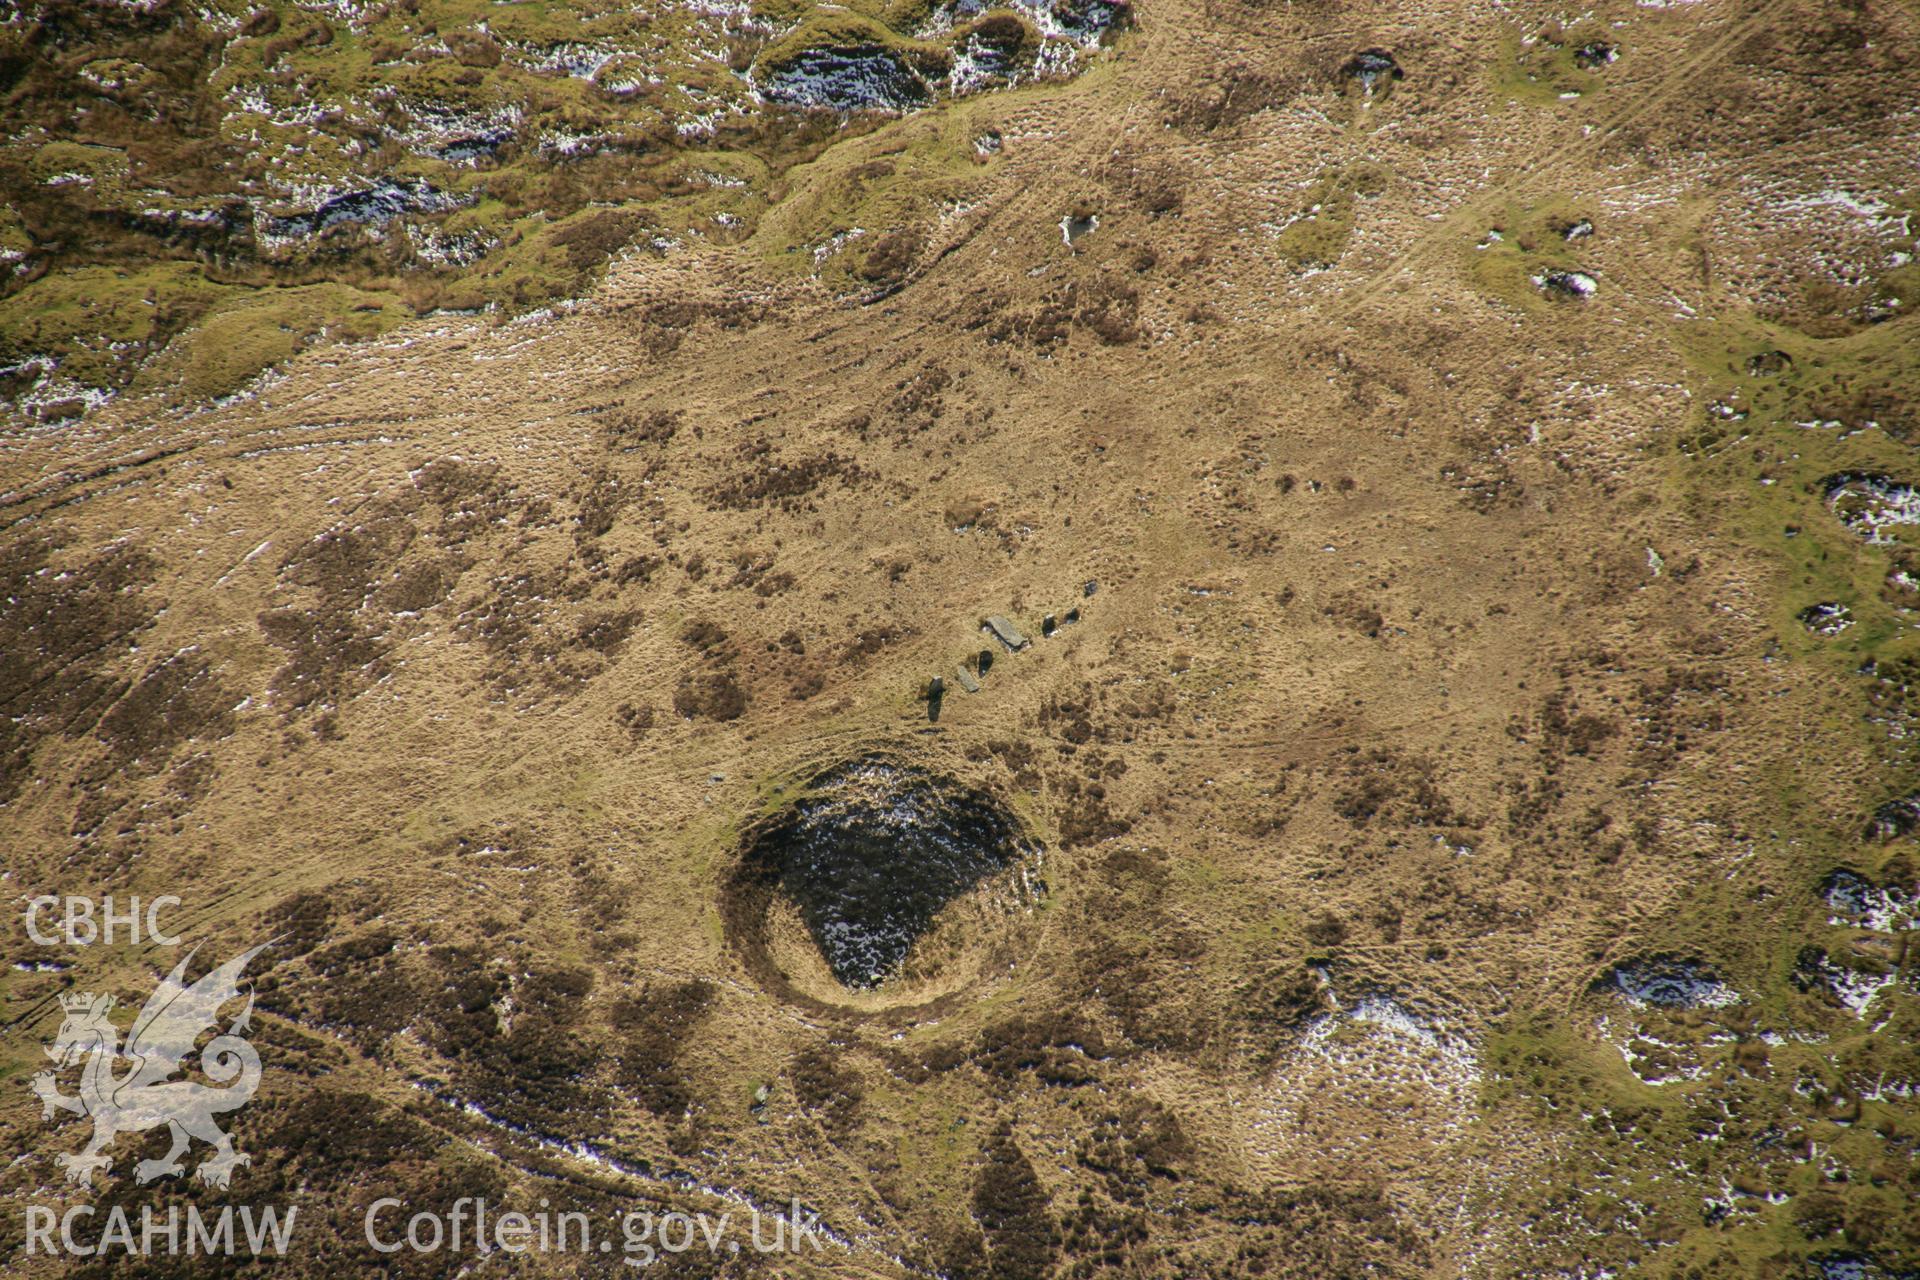 RCAHMW colour oblique aerial photograph of Saith Maen Stone Alignment, Glyntawe. Taken on 21 March 2007 by Toby Driver